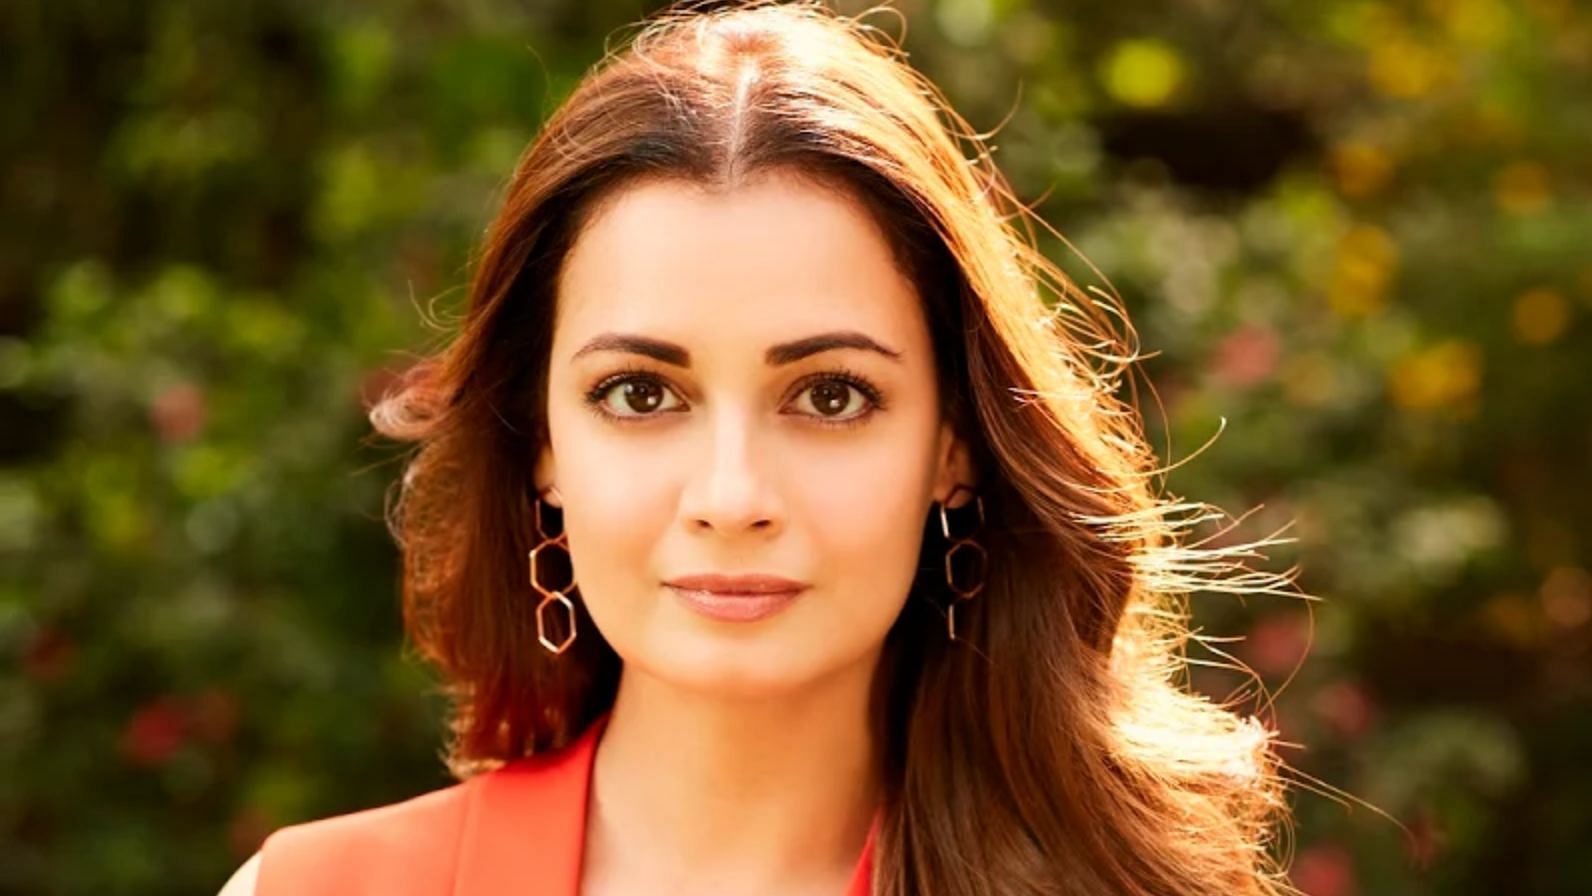 Dia Mirza emphasises on nature’s message during the lockdown period, says we must rethink how we live our lives.